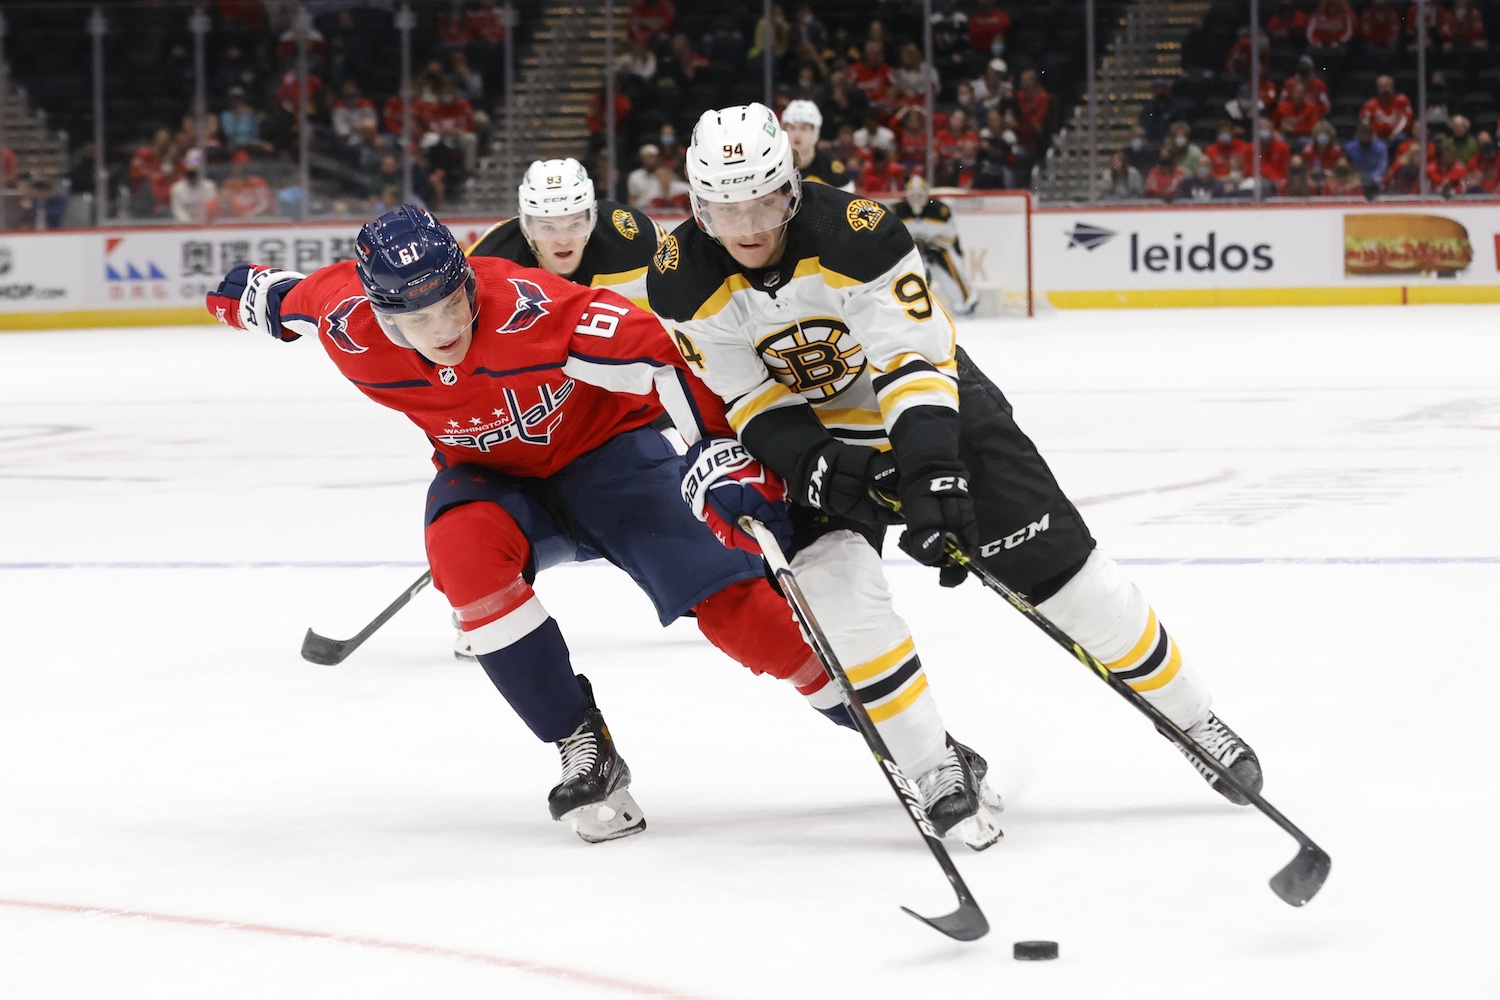 Sep 26, 2021; Washington, District of Columbia, USA; Boston Bruins center Jakub Lauko (94) skates with the puck as Washington Capitals defenseman Martin Has (61) defends during the first period at Capital One Arena. Mandatory Credit: Geoff Burke-USA TODAY Sports